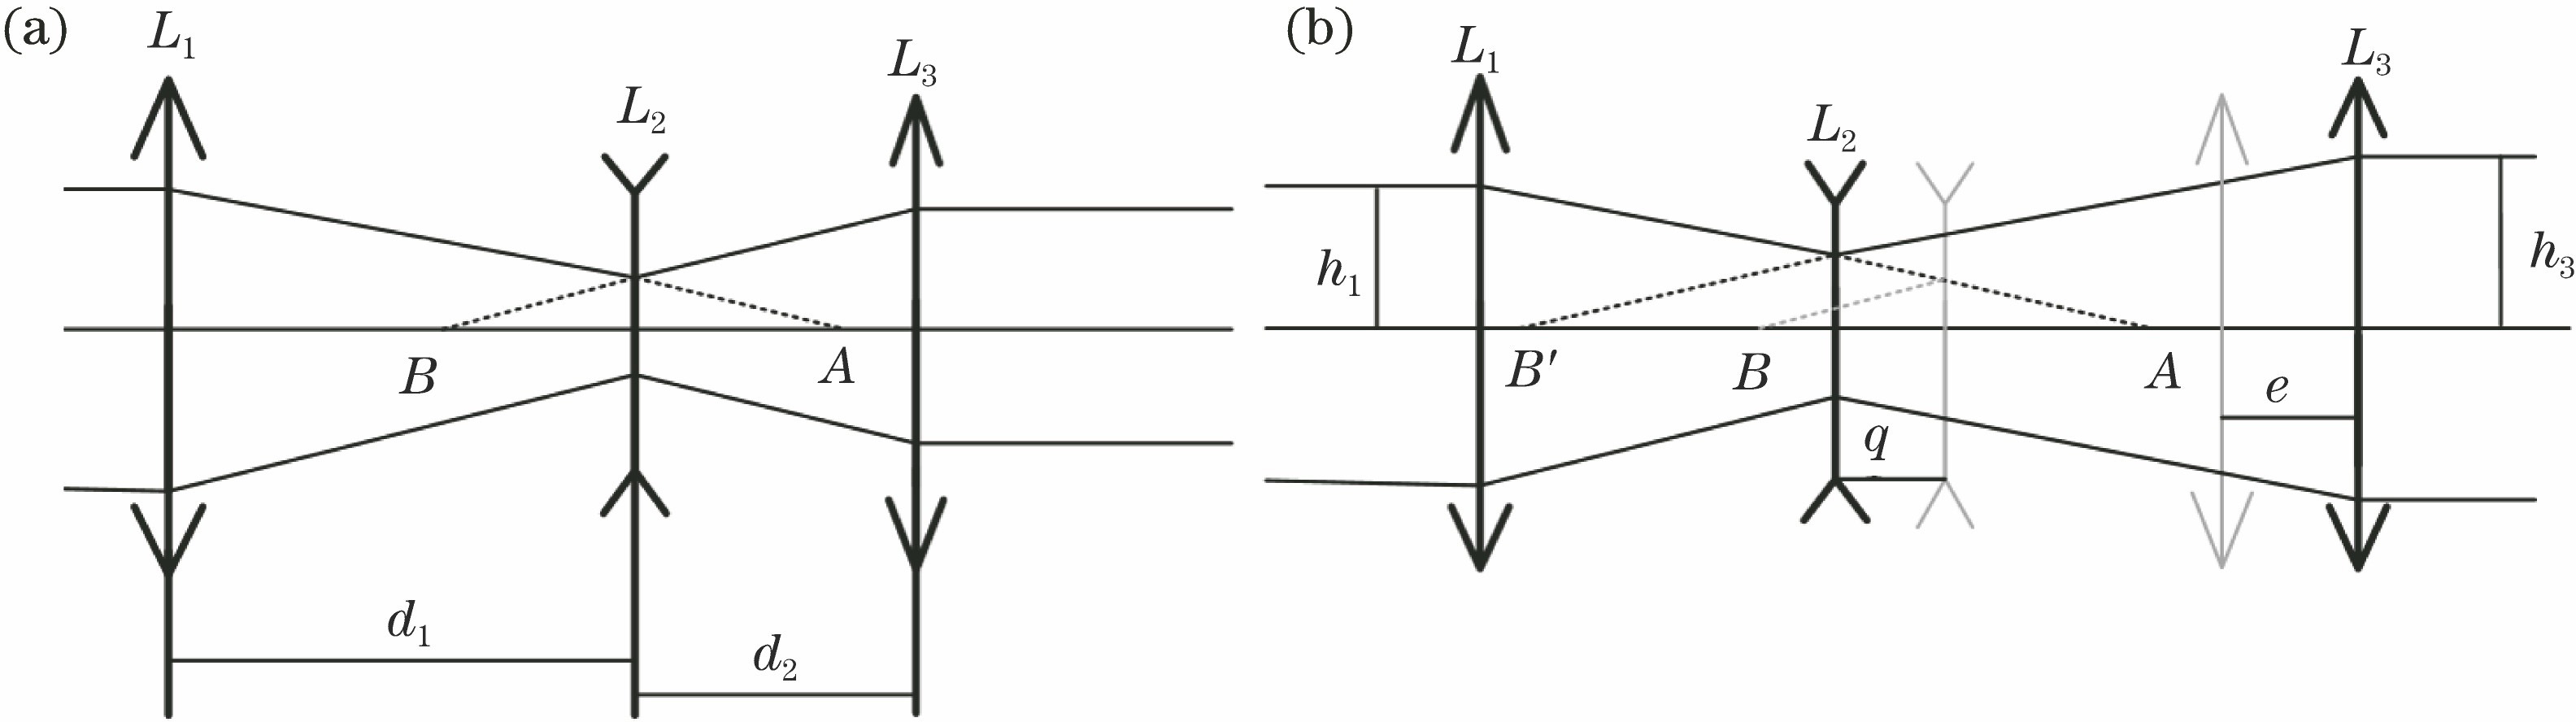 Schematic of afocal zoom system. (a) Focal fixation system; (b) zoom system